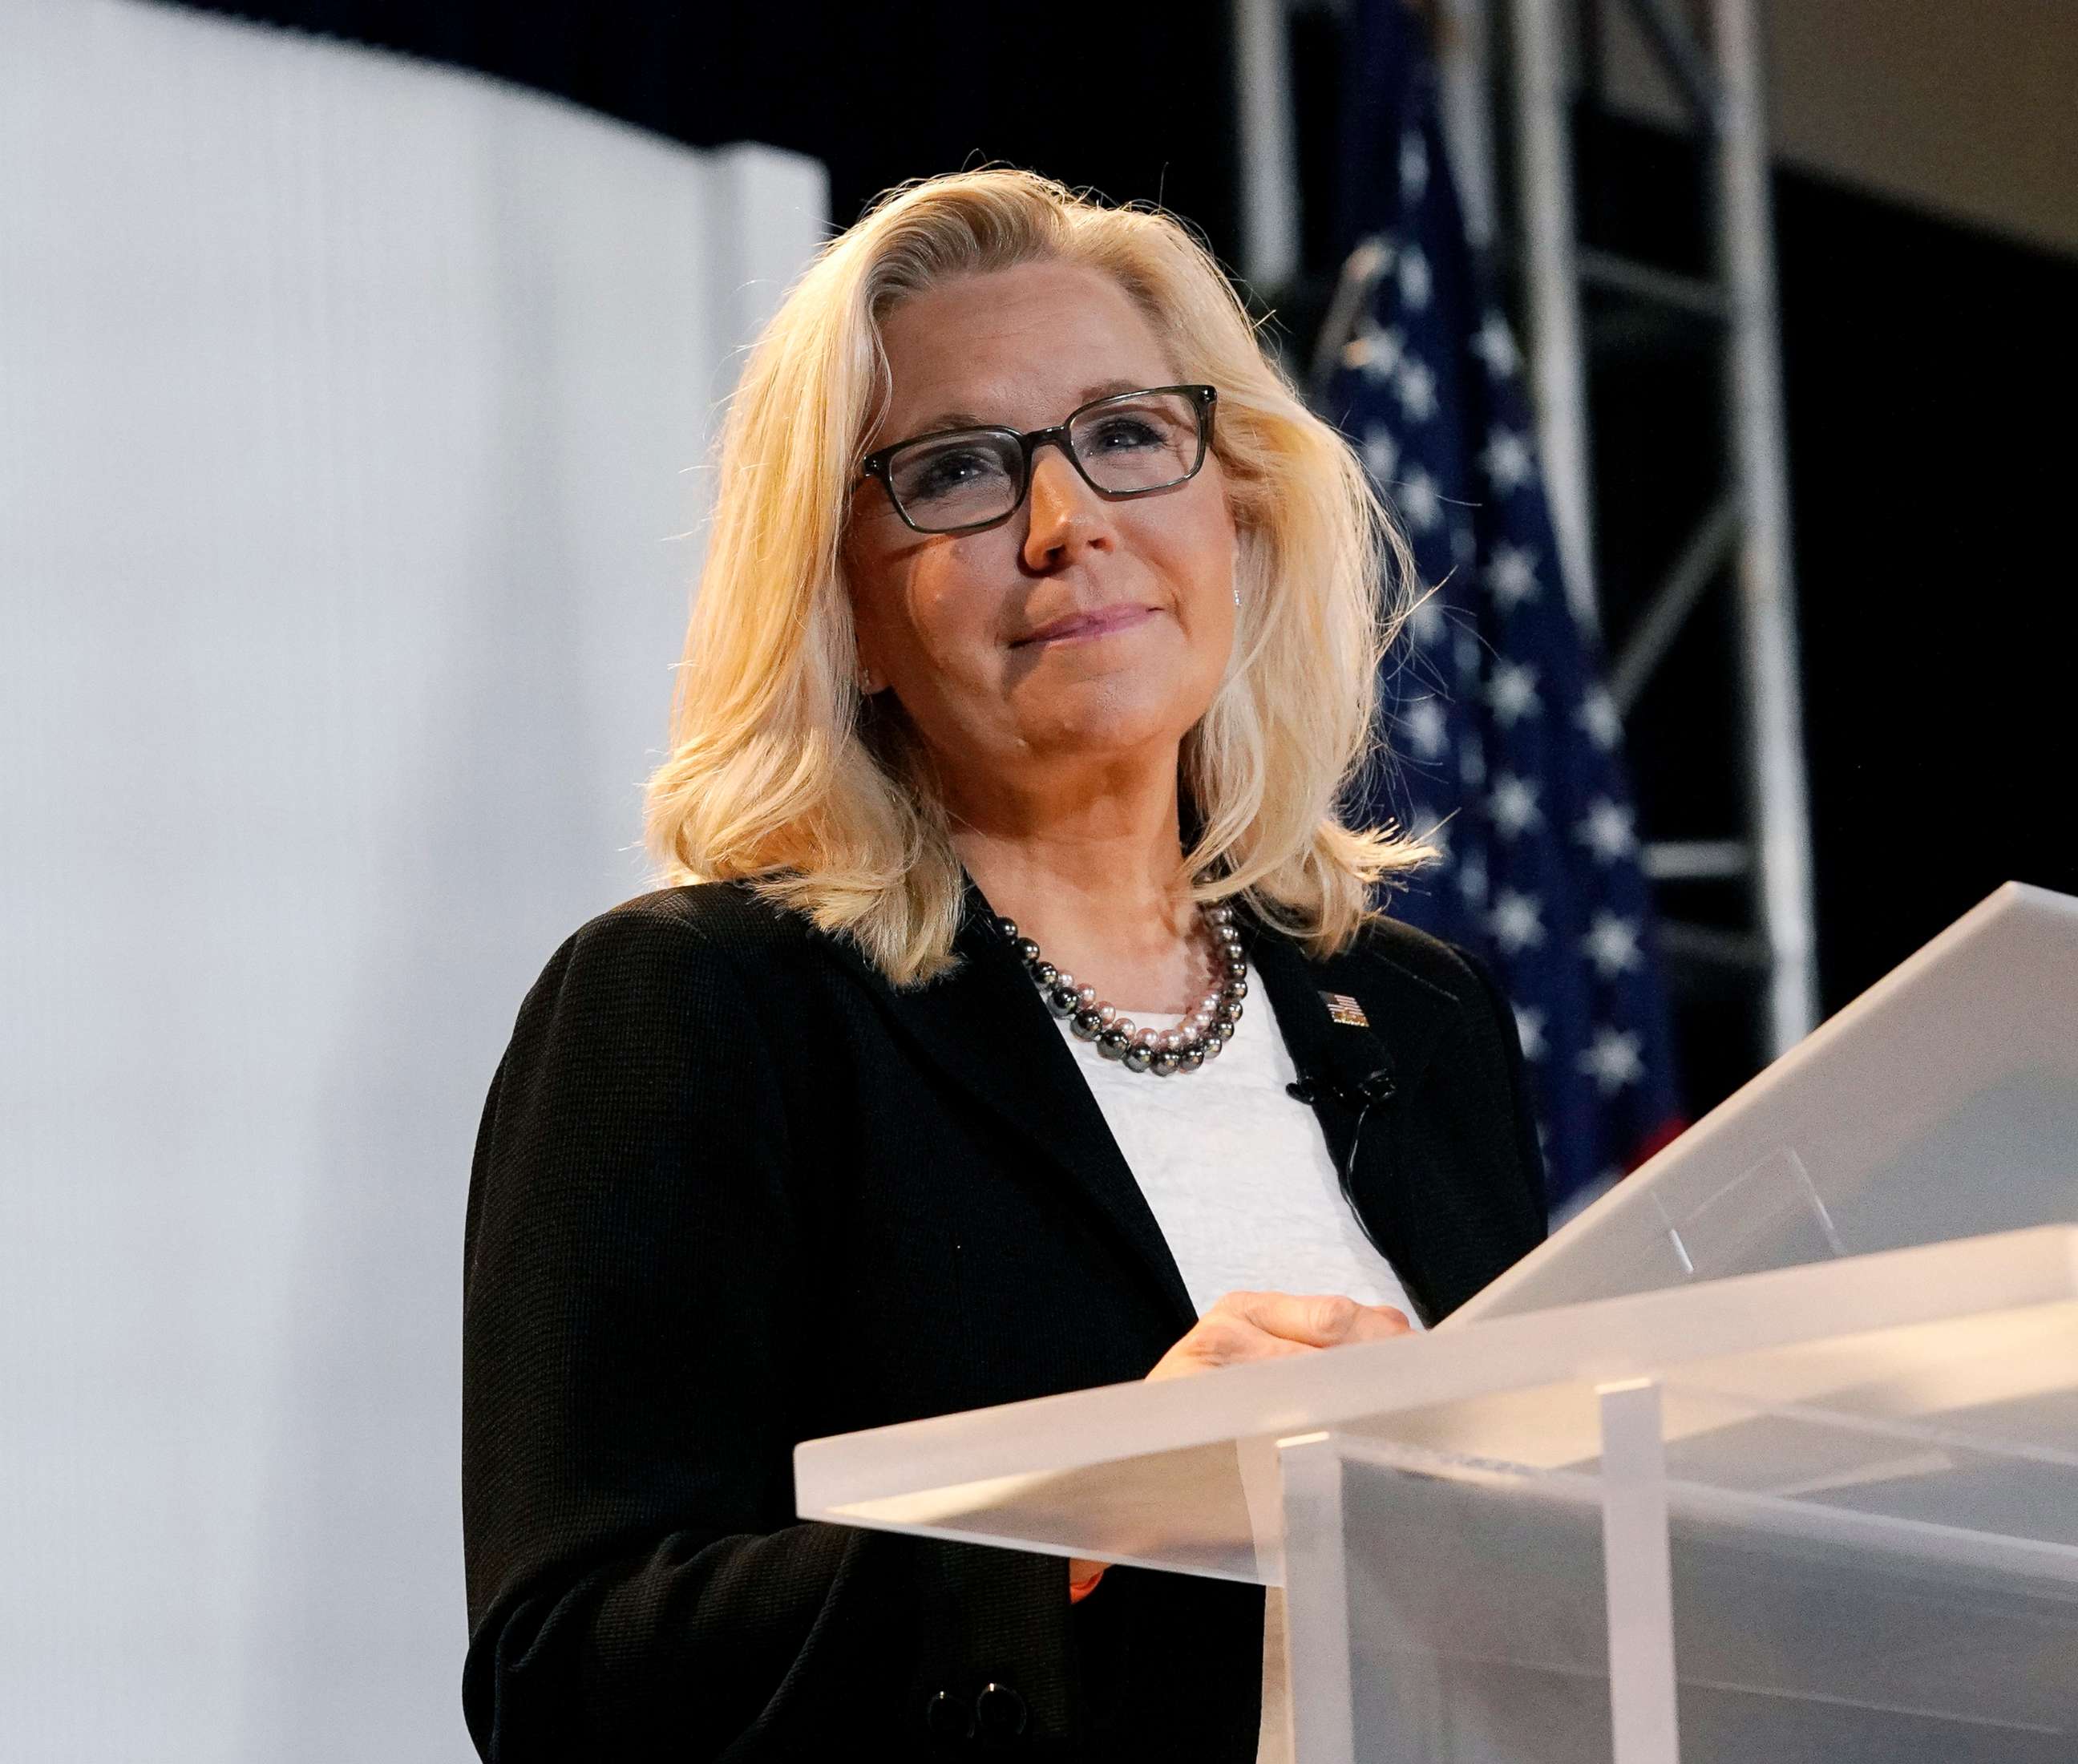 PHOTO: Rep. Liz Cheney, vice chair of the House Select Committee investigating the Jan. 6 U.S. Capitol insurrection, delivers her "Time for Choosing" speech at the Ronald Reagan Presidential Library and Museum, June 29, 2022, in Simi Valley, Calif.